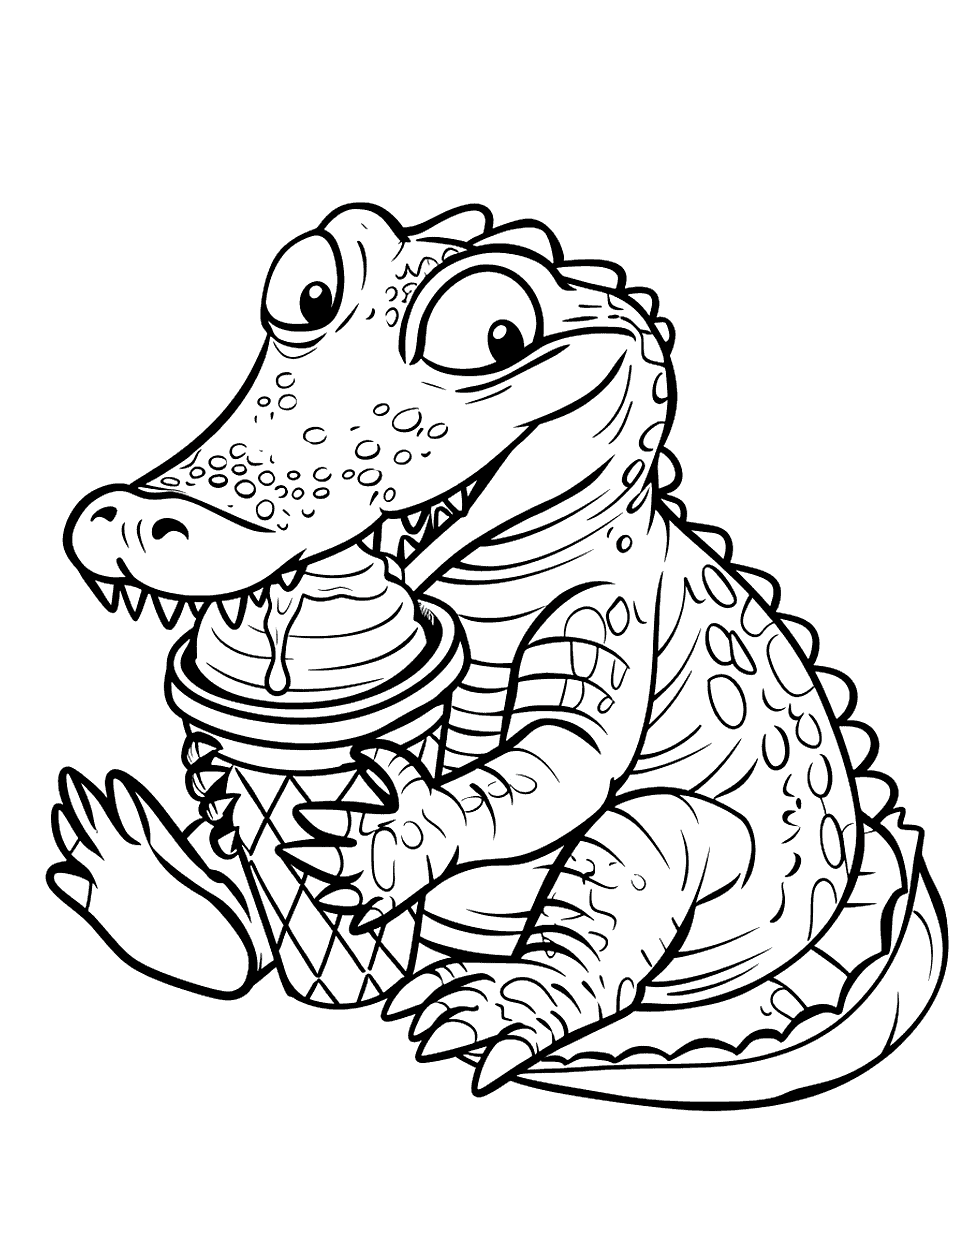 Alligator Eating Ice Cream Coloring Page - An alligator enjoying an ice cream cone with a big smile.